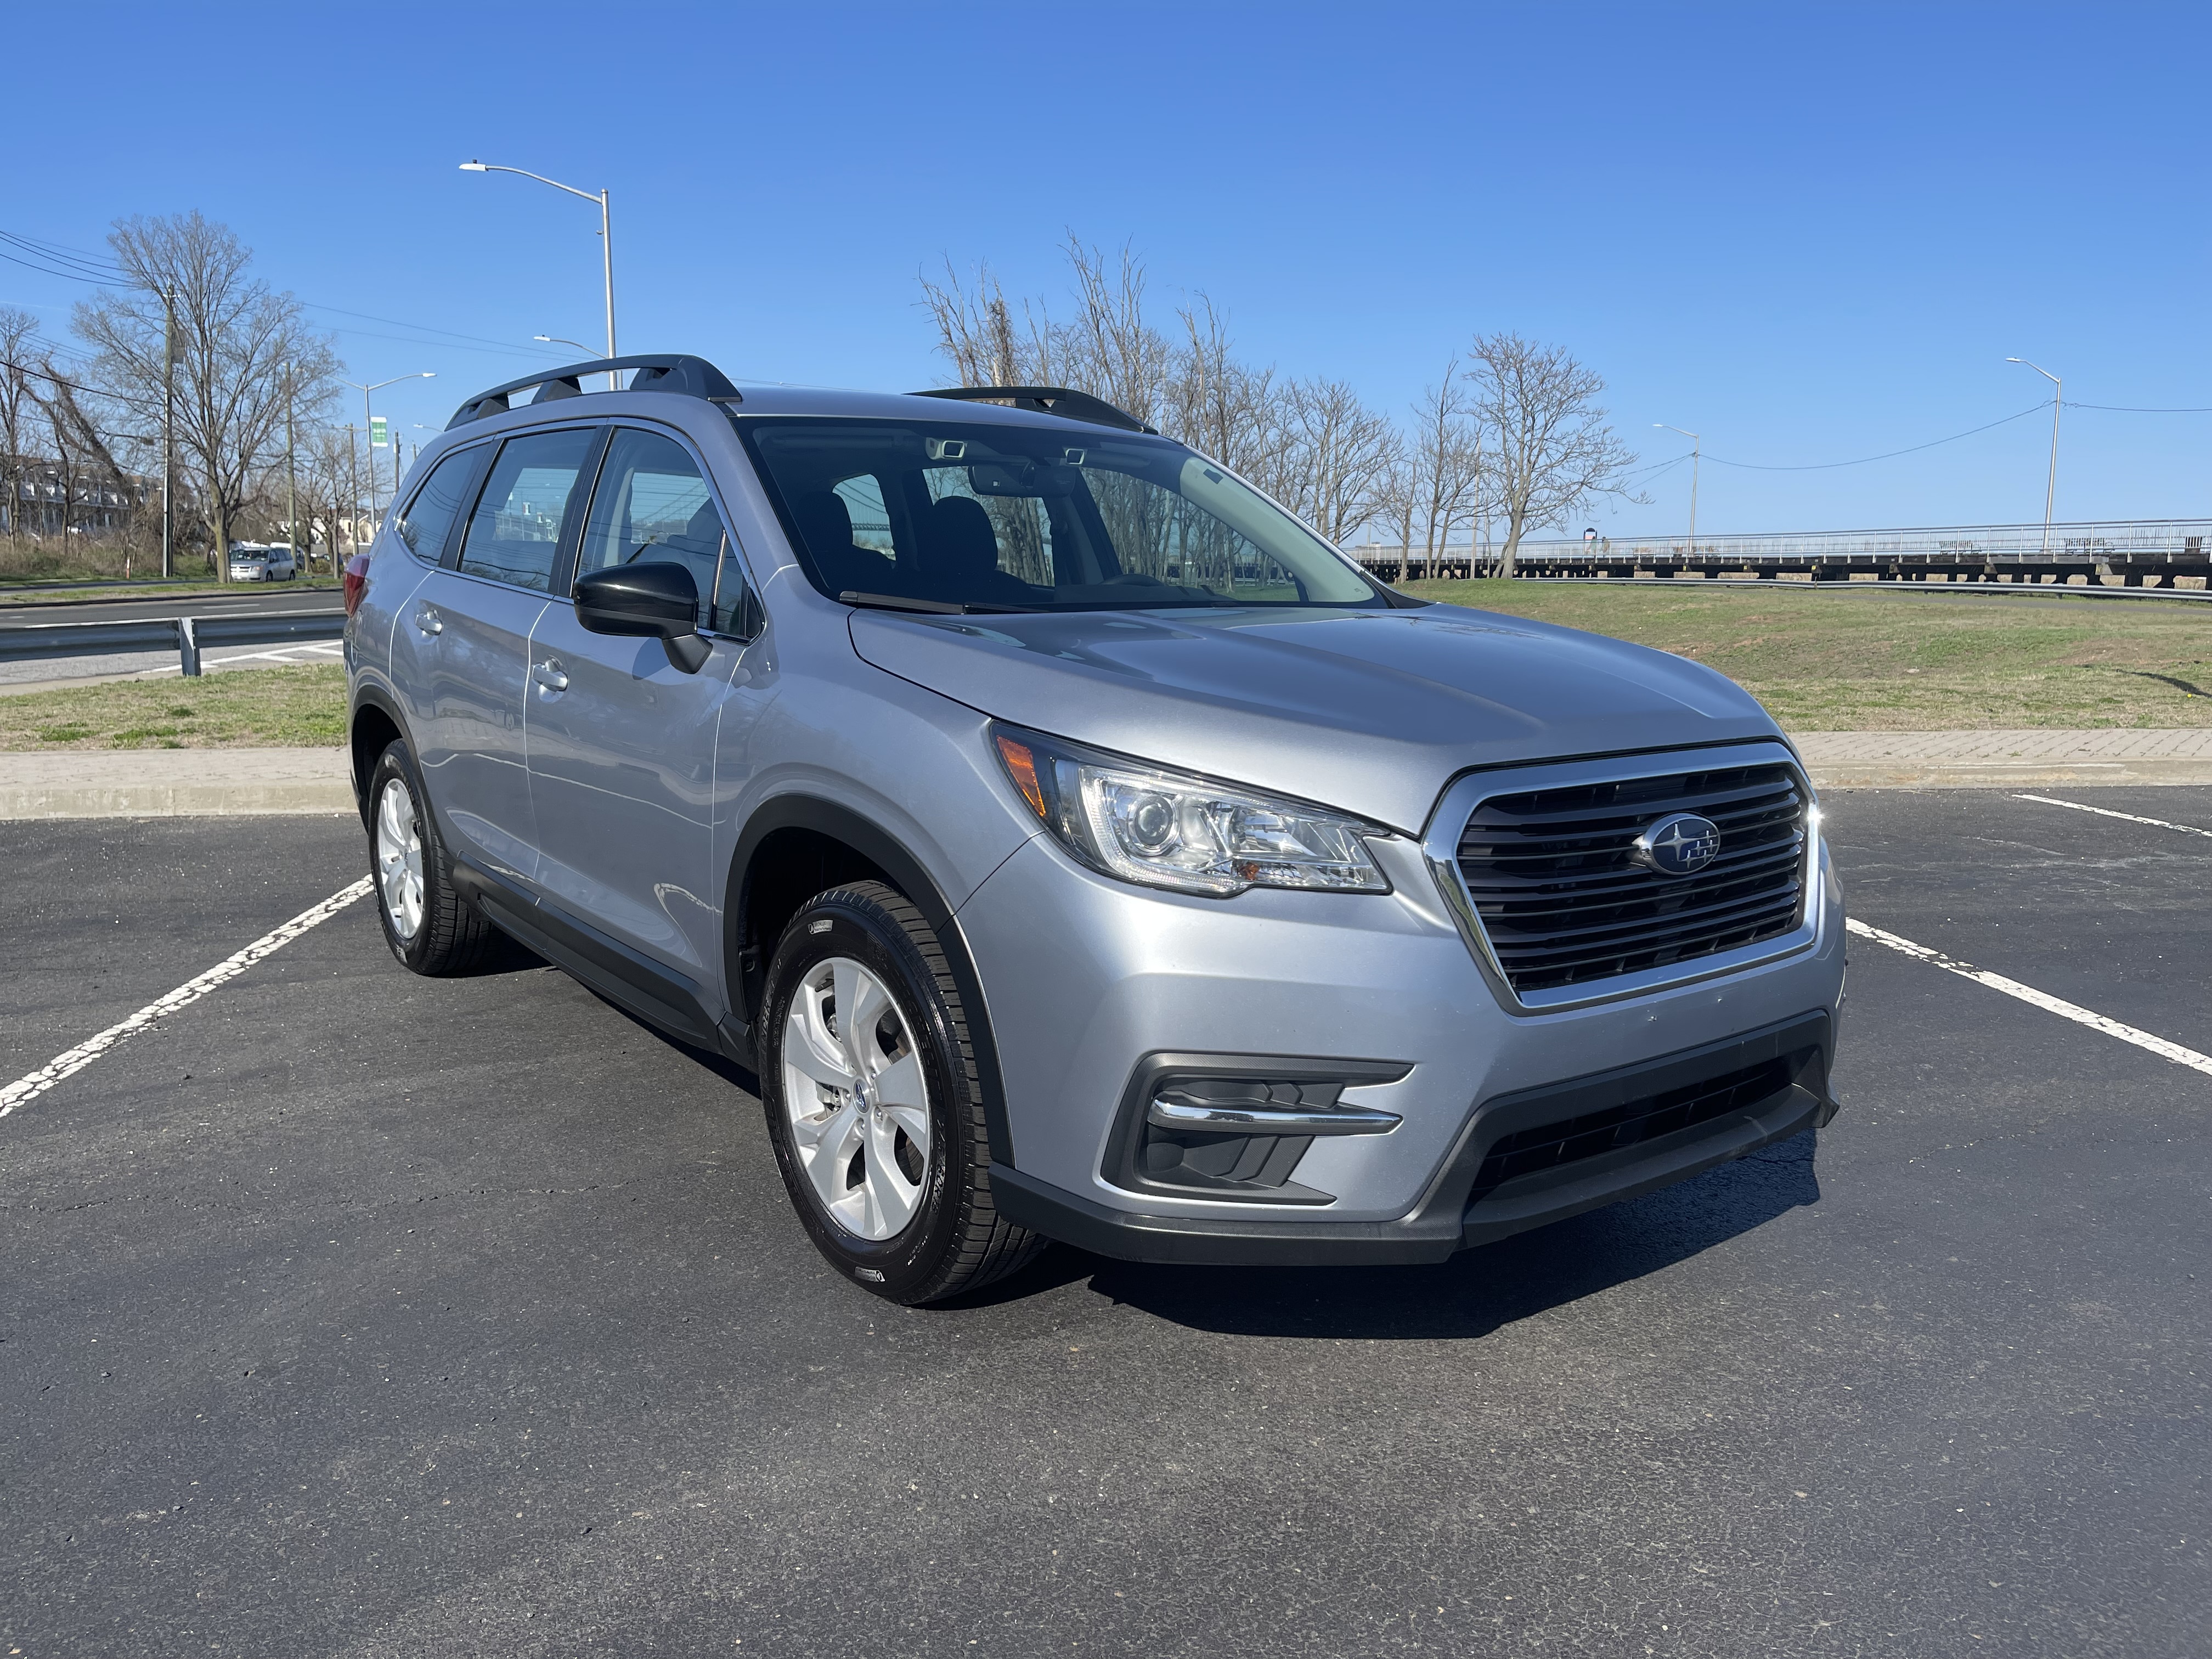 Used - Subaru Ascent AWD SUV for sale in Staten Island NY